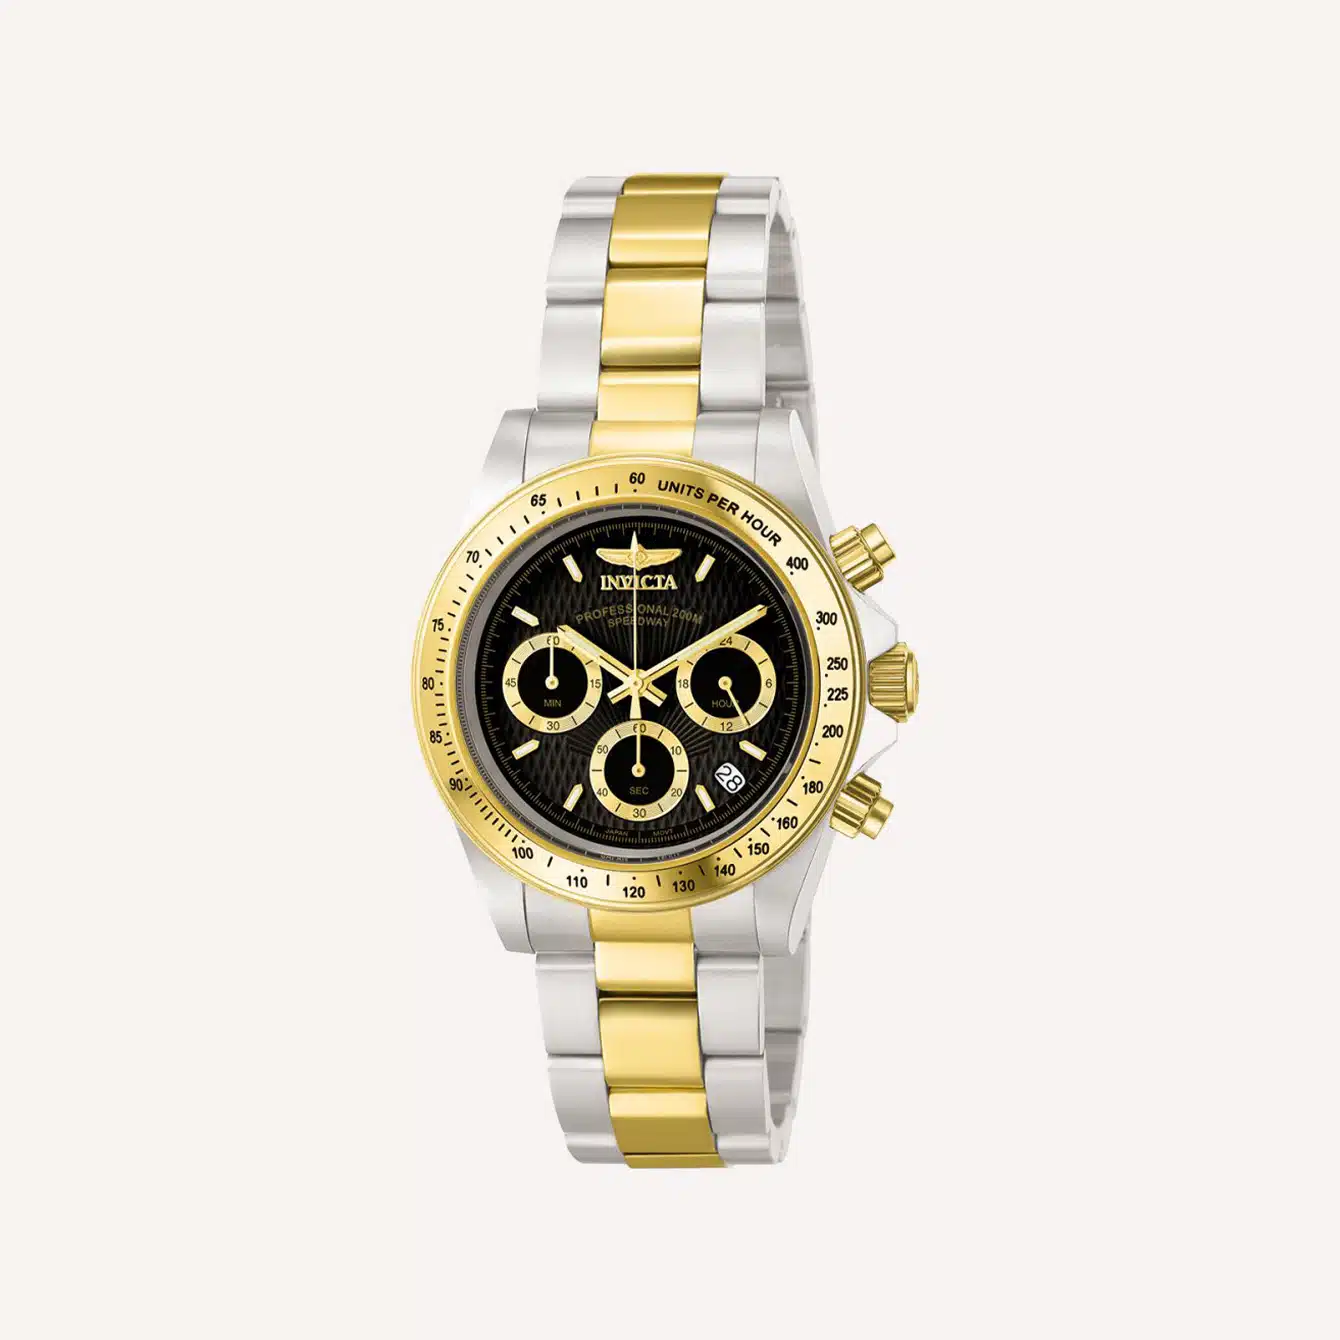 12 Best Invicta Watches (Invicta Watch Buying Guide)-8